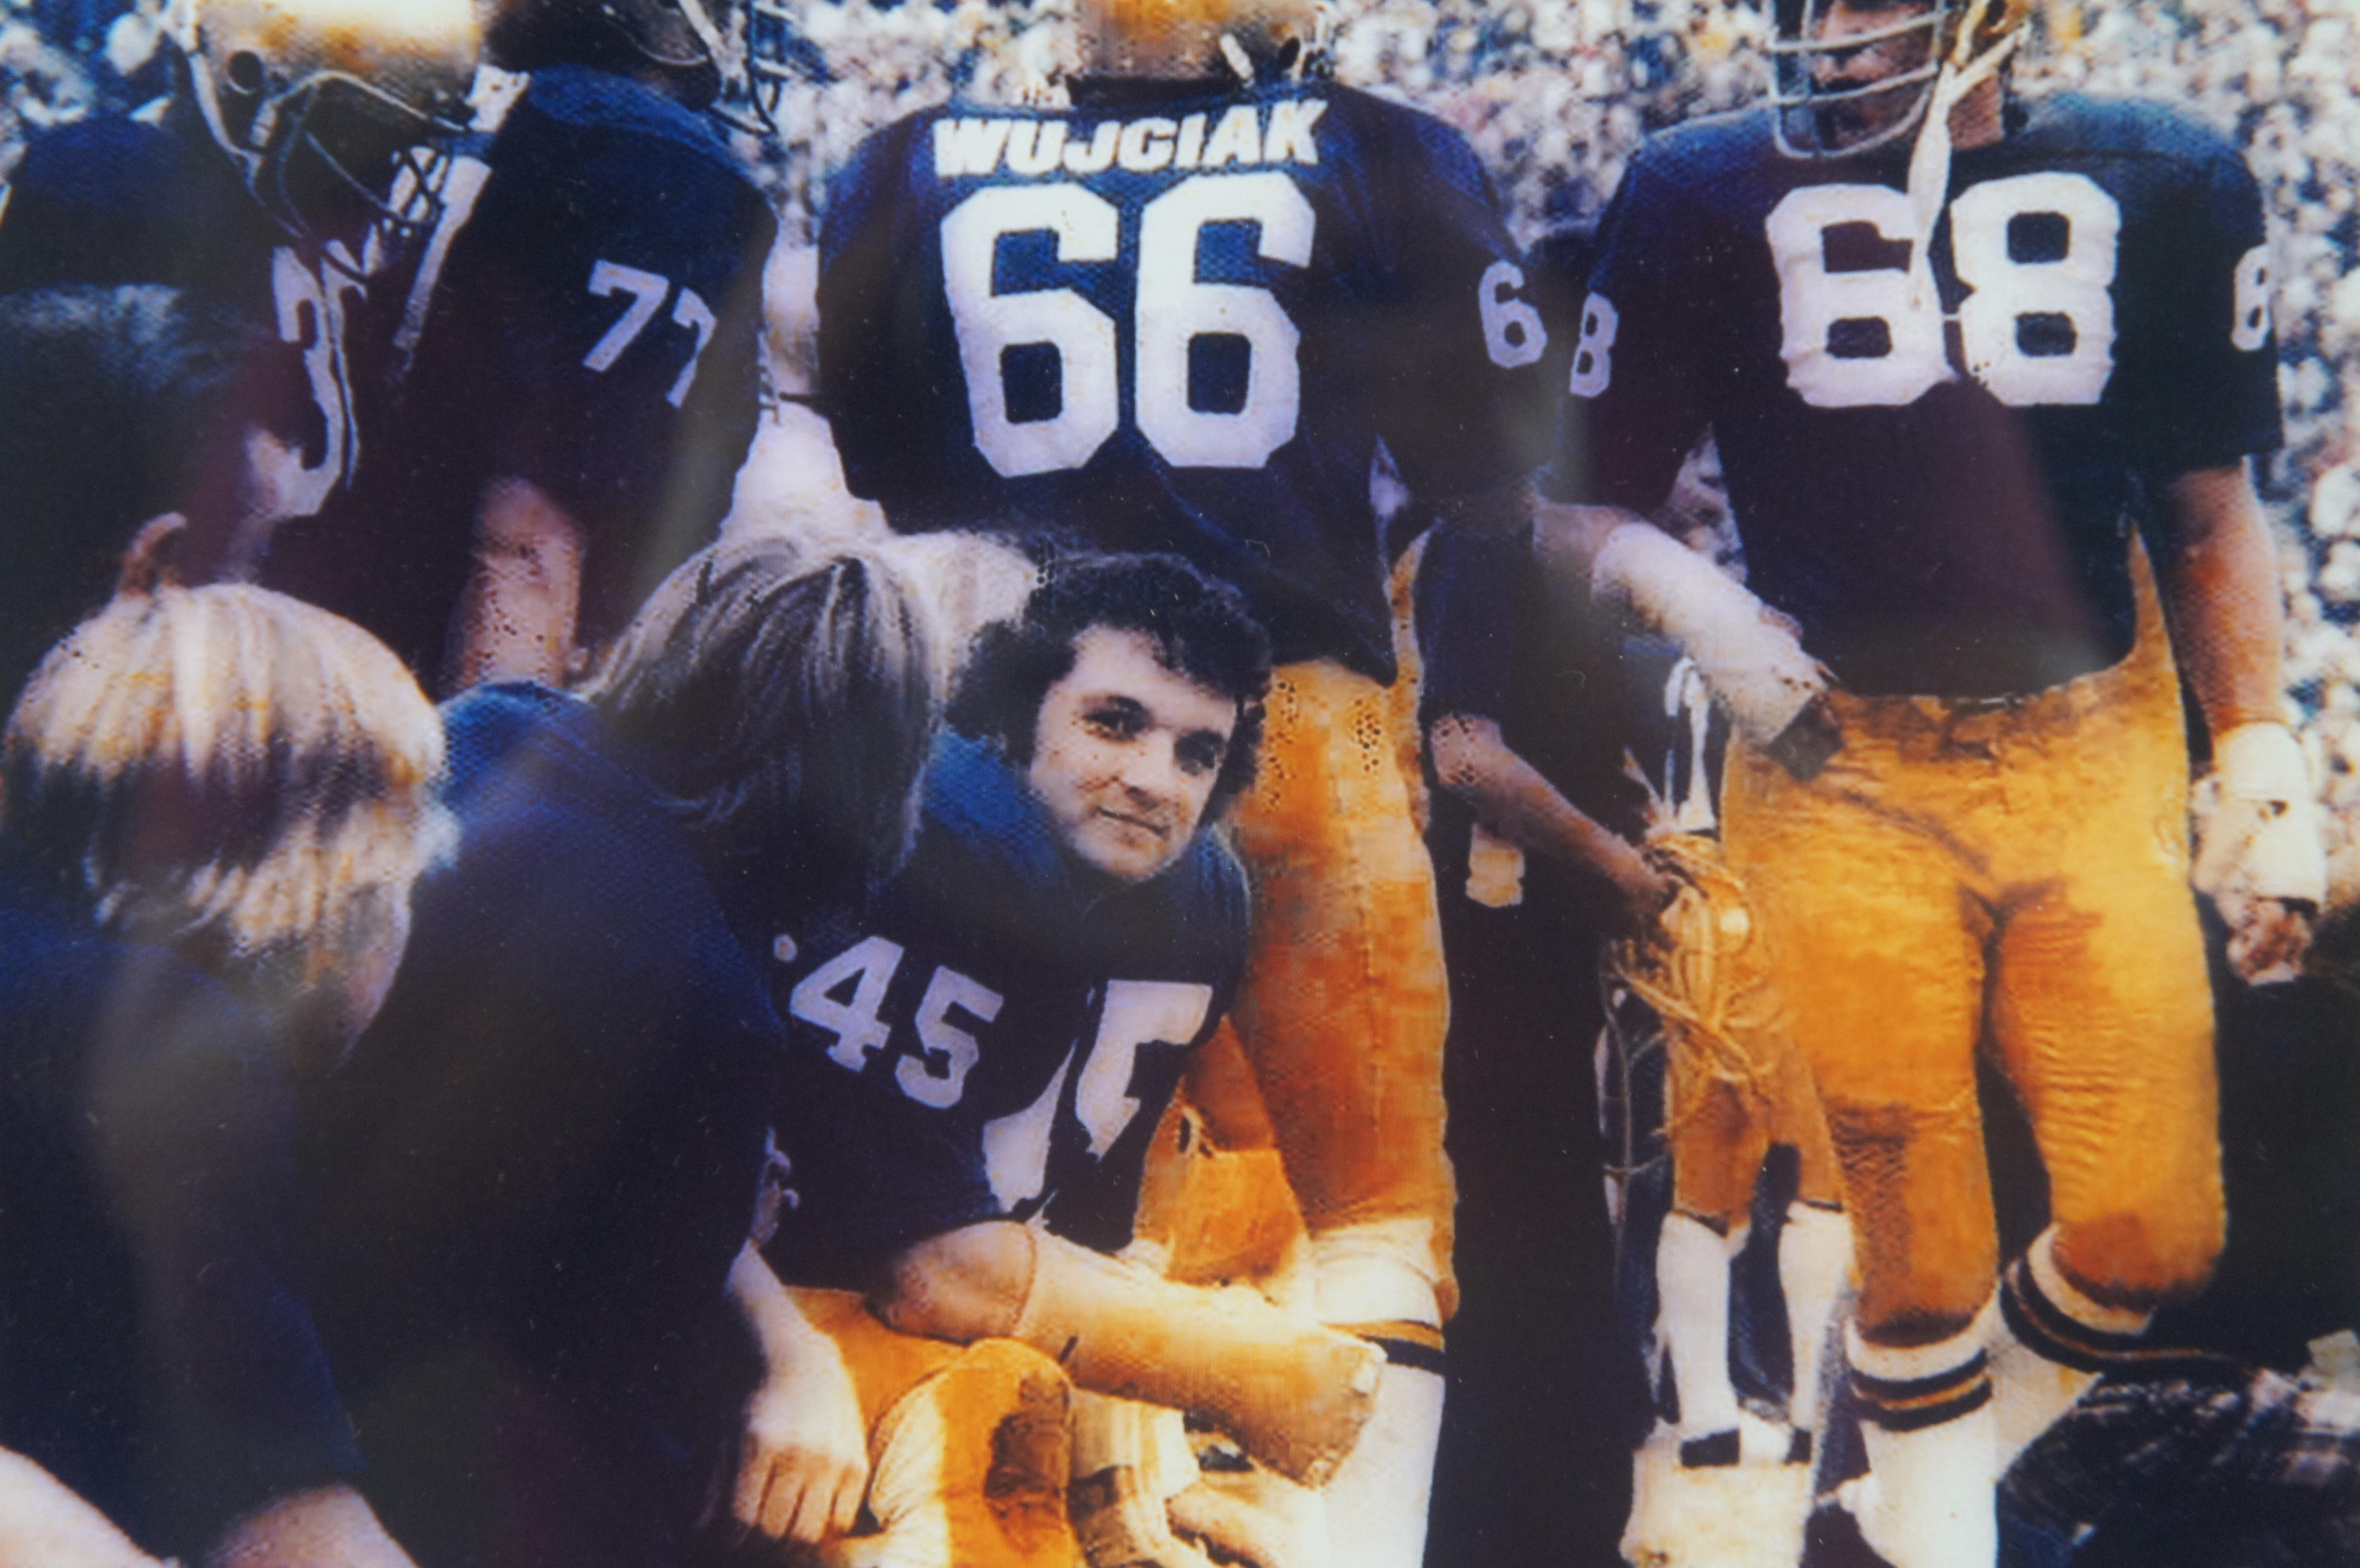 Vintage Rudy Ruettiger #45 Notre Dame Football Autographed Photo 27